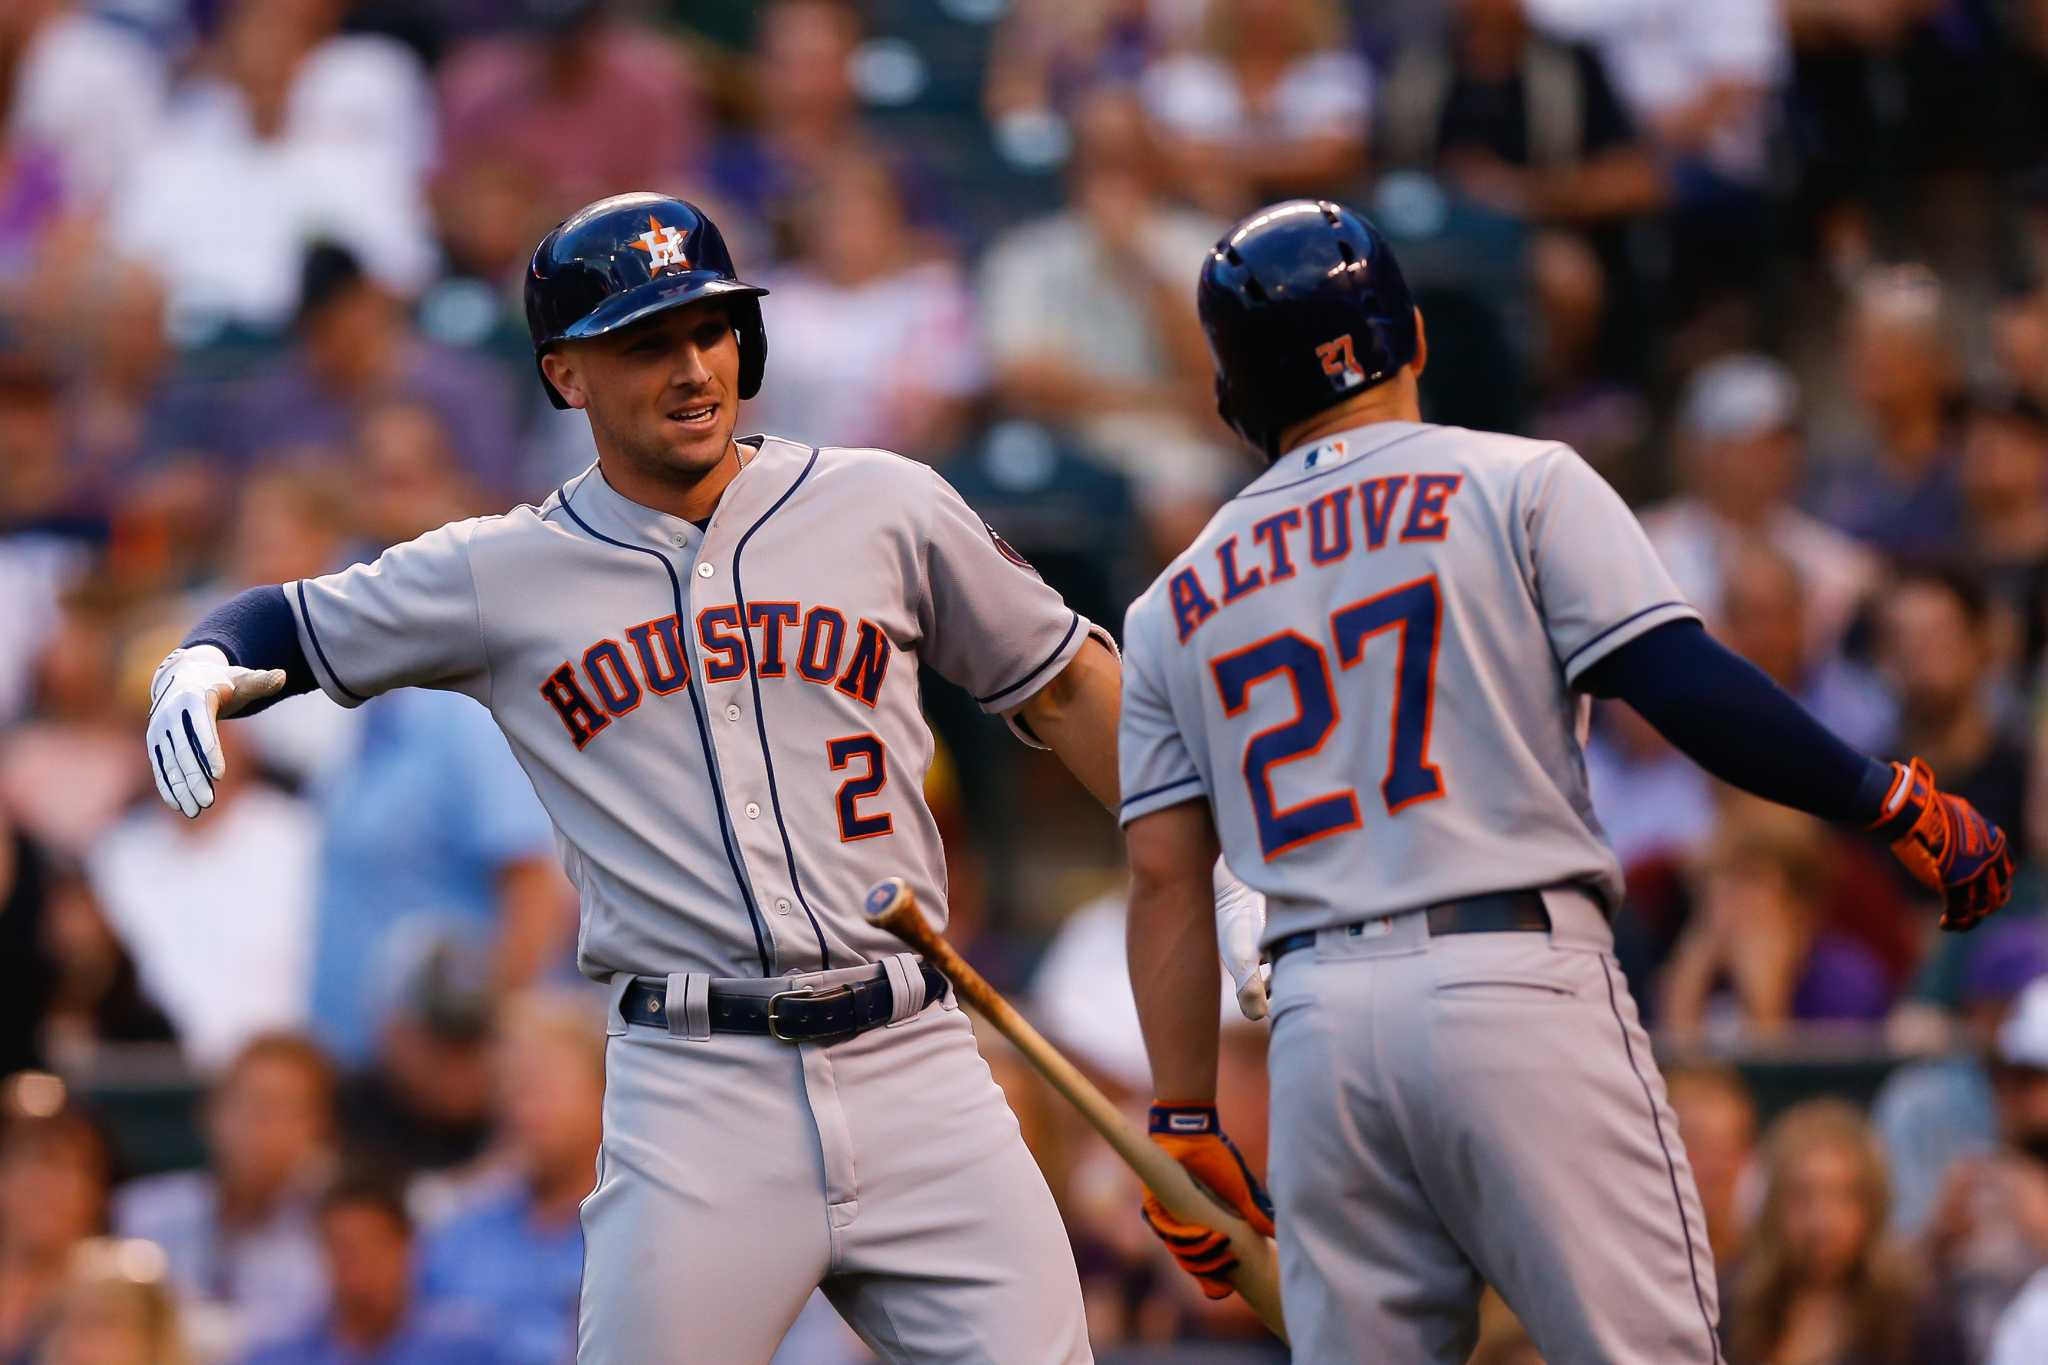 Astros Set to Sizzle Against Rockies: Better Hustle to Hustle Town for the  Win!